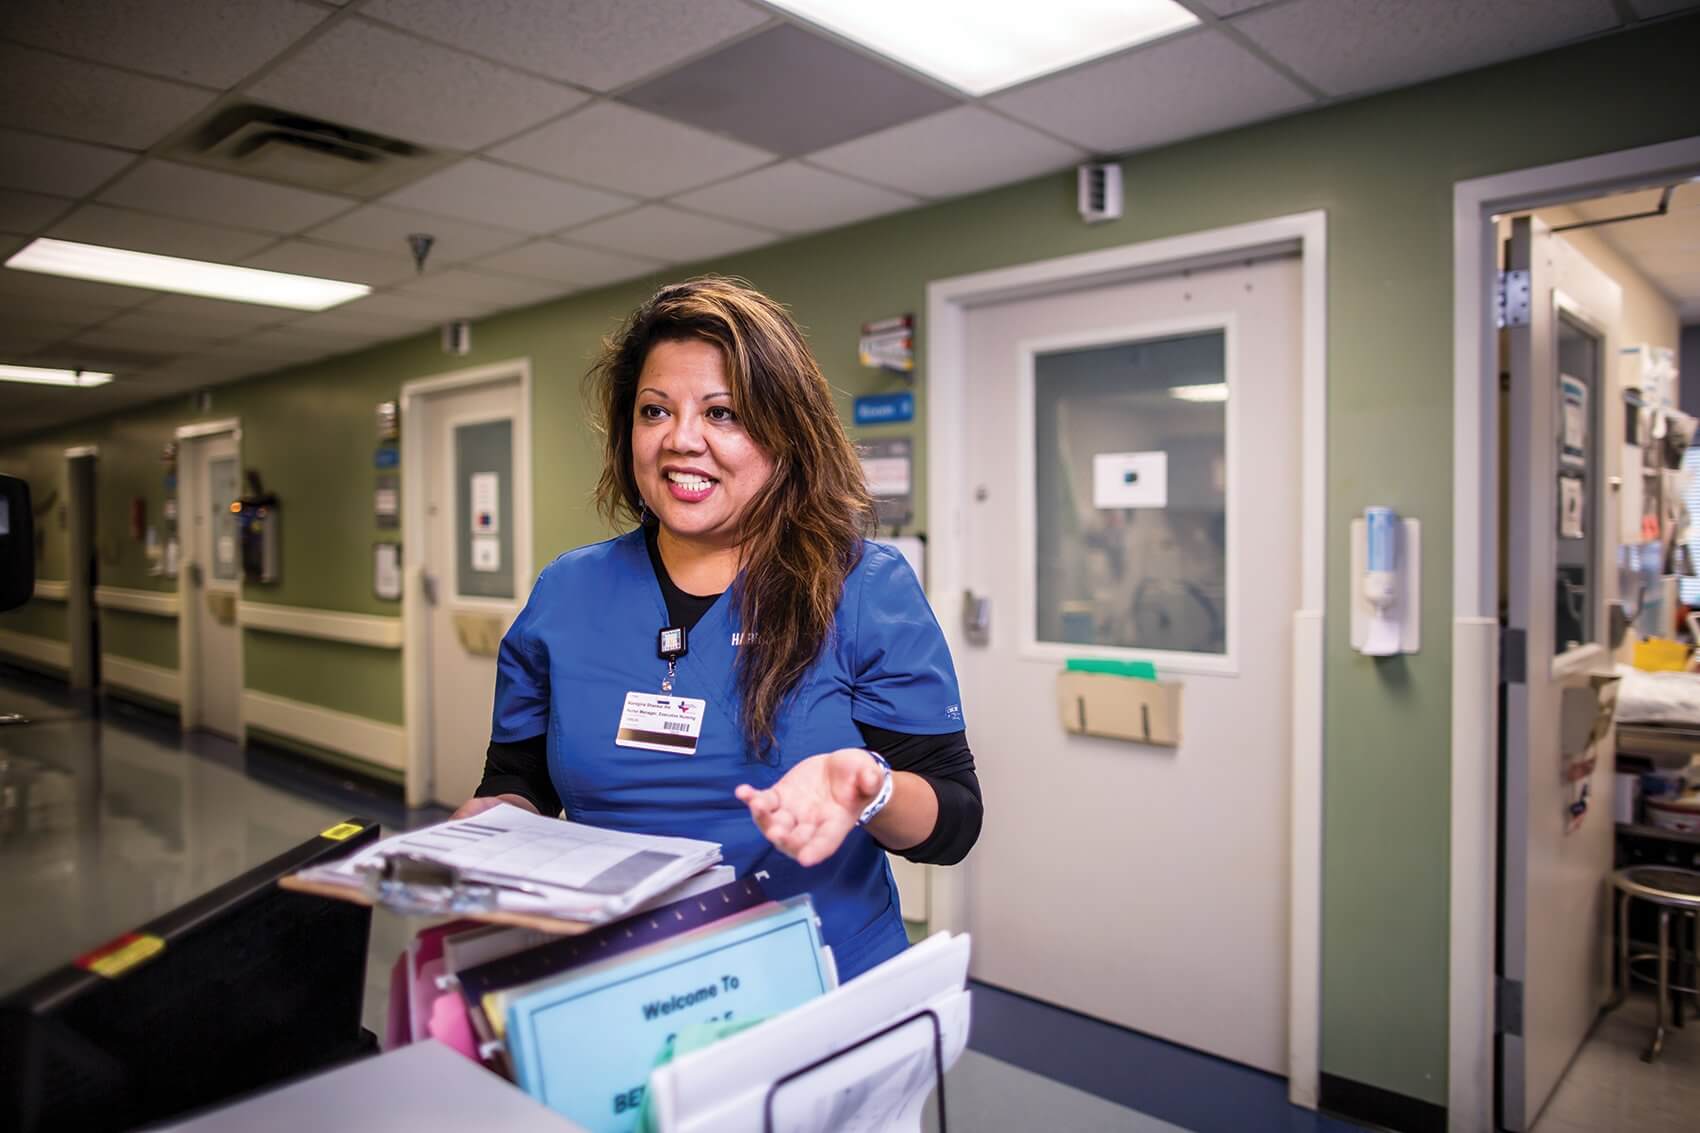 Maregina N. Shankar, nurse manager for the Head and Neck Specialty Clinics at Harris Health System’s Ben Taub Hospital, came to Houston in 1988 from the Philippines.